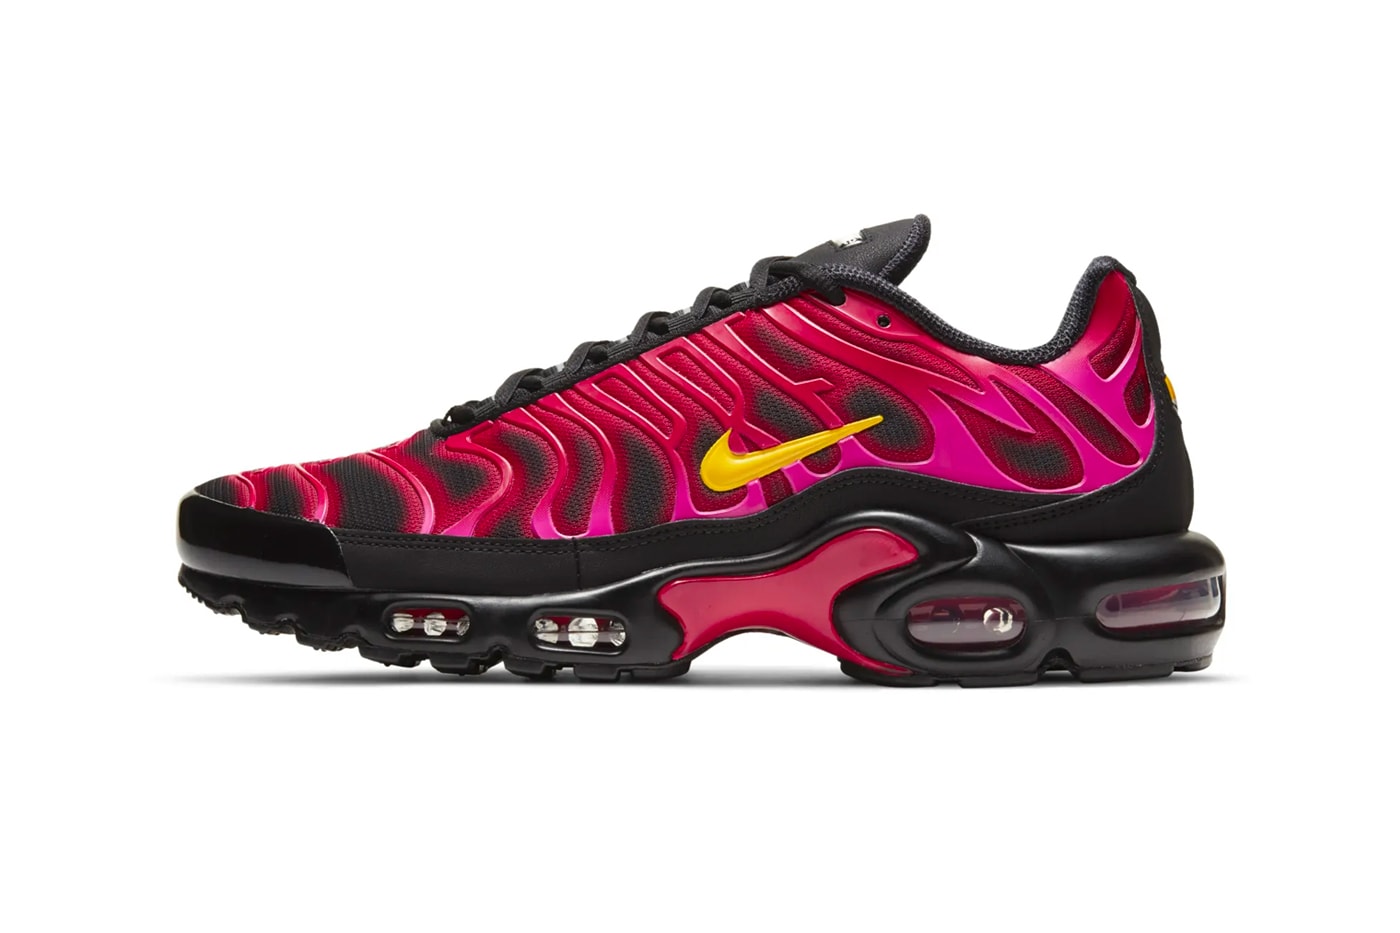 Supreme Nike Air Max Plus TN Pink" "Mean Green" Re-Release | Hypebeast